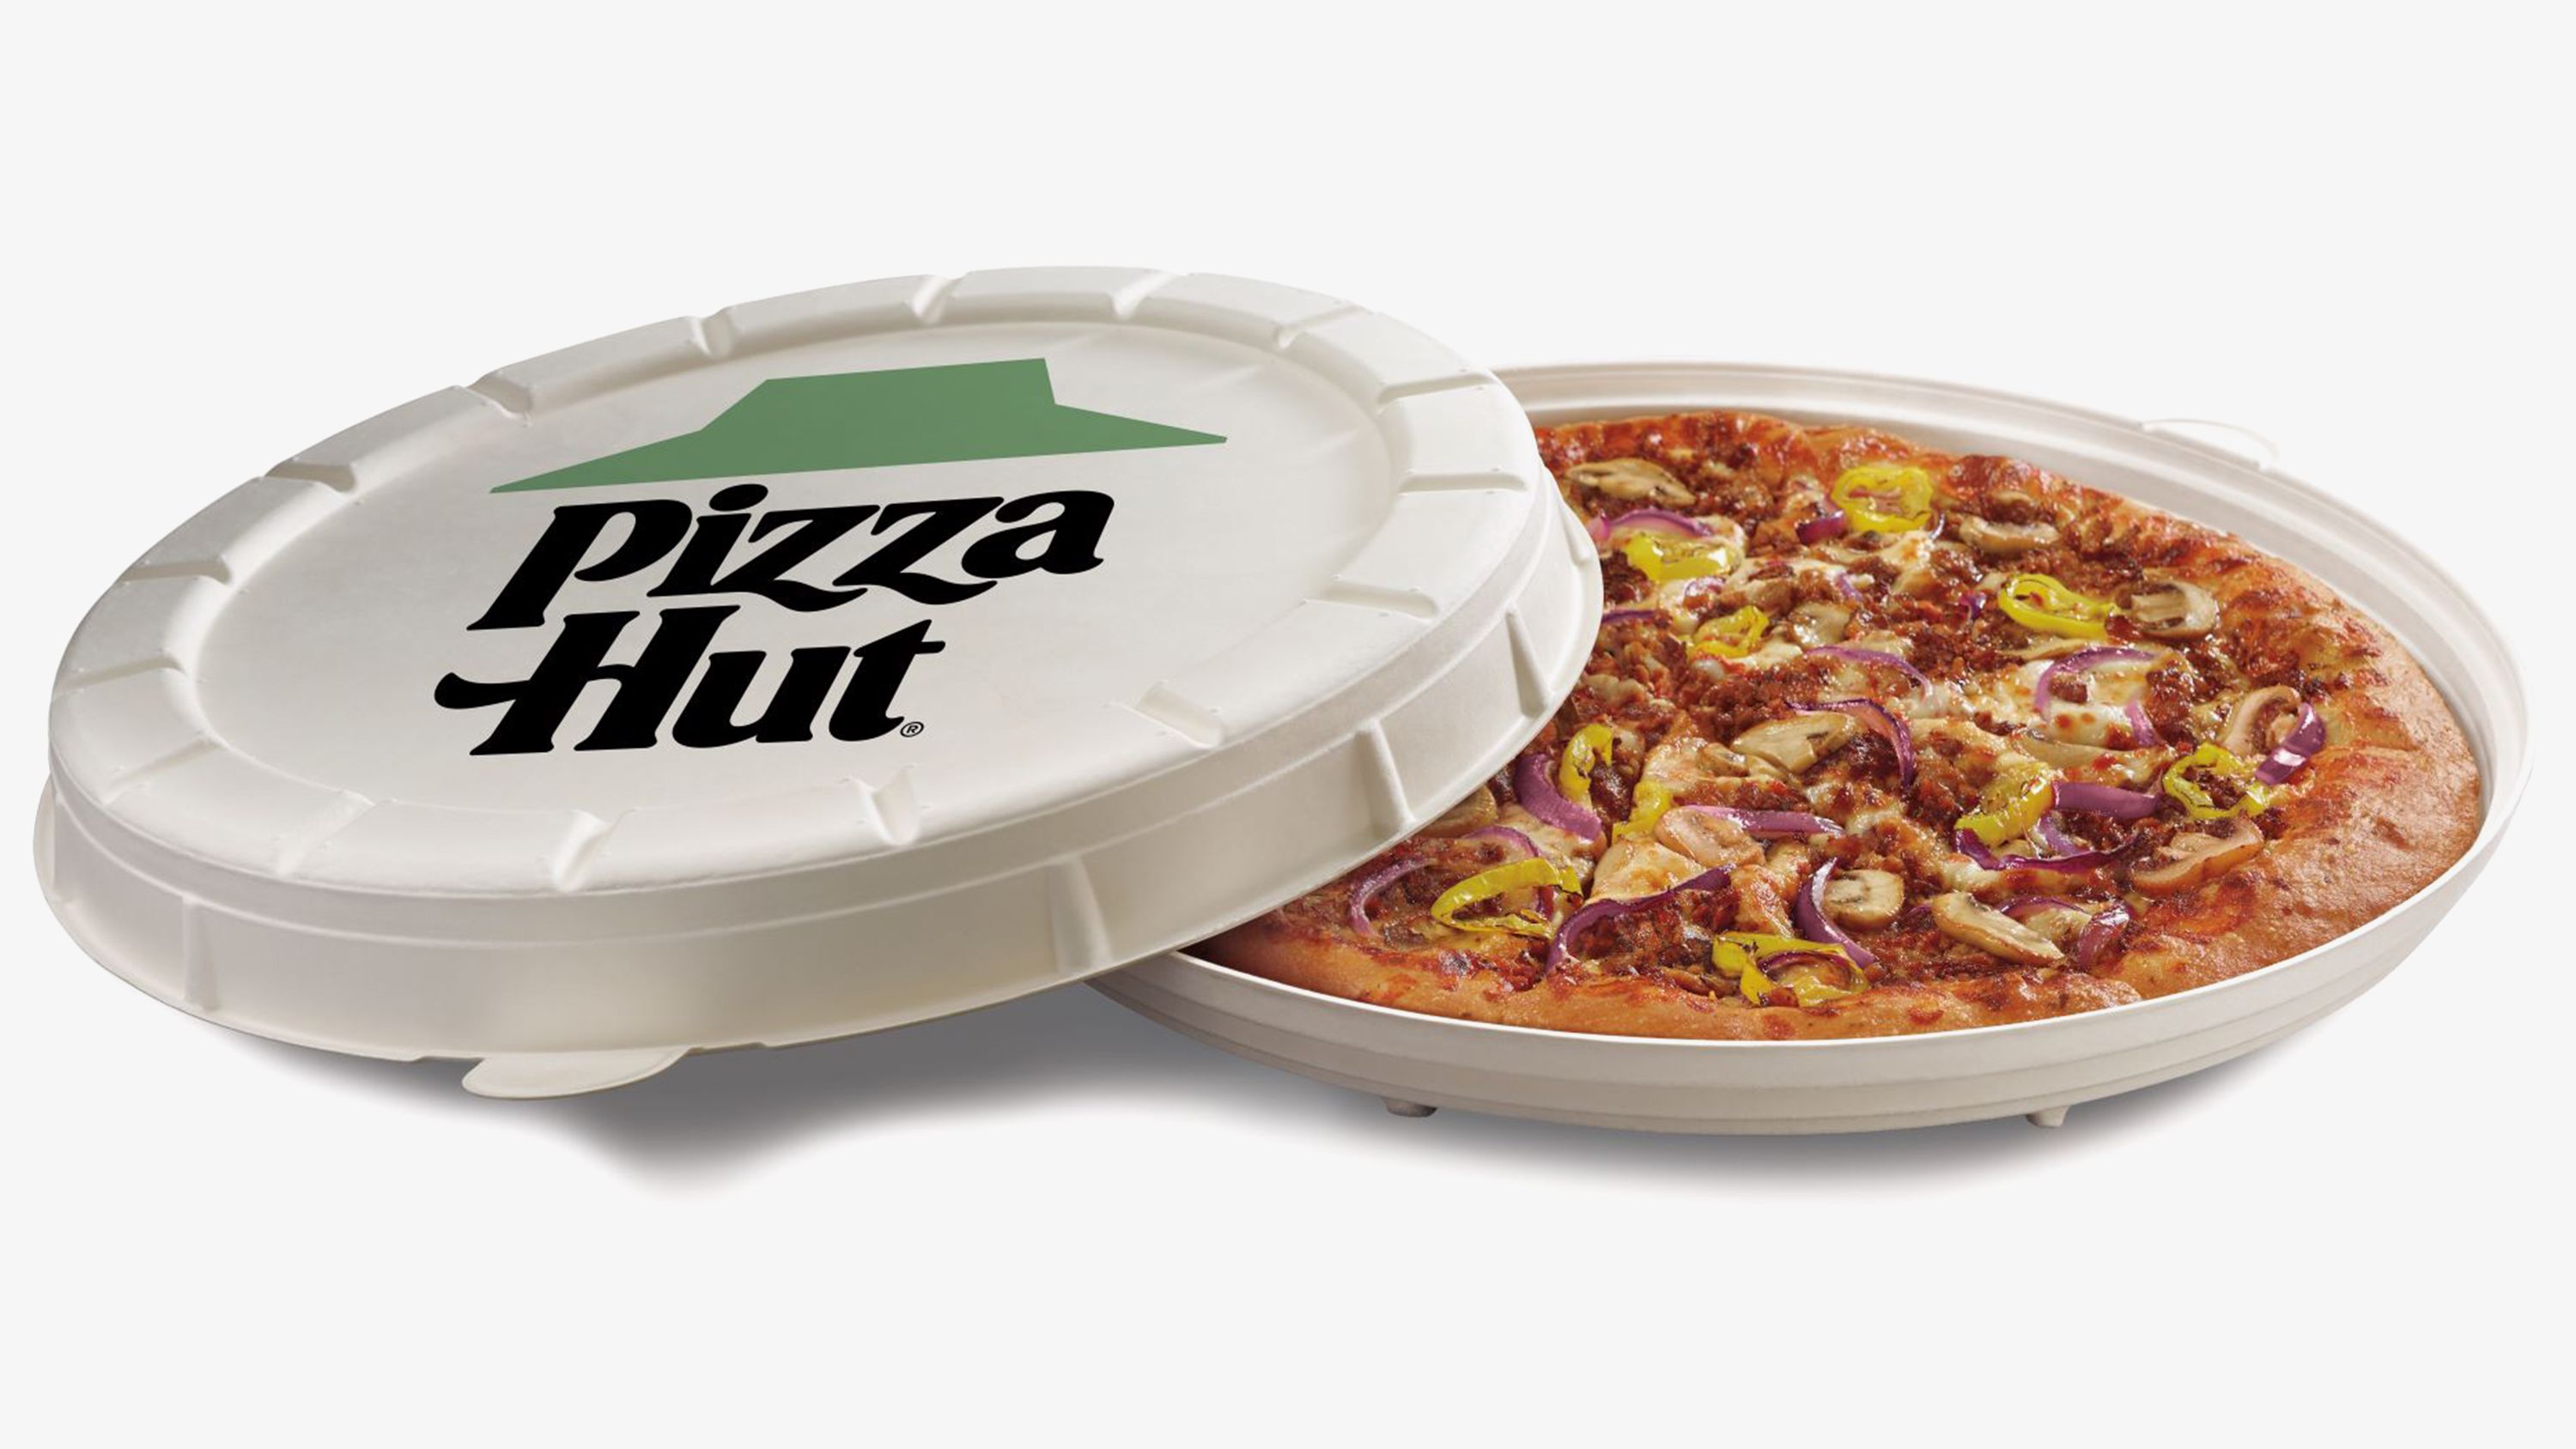 The Hut is rolling out a round pizza box